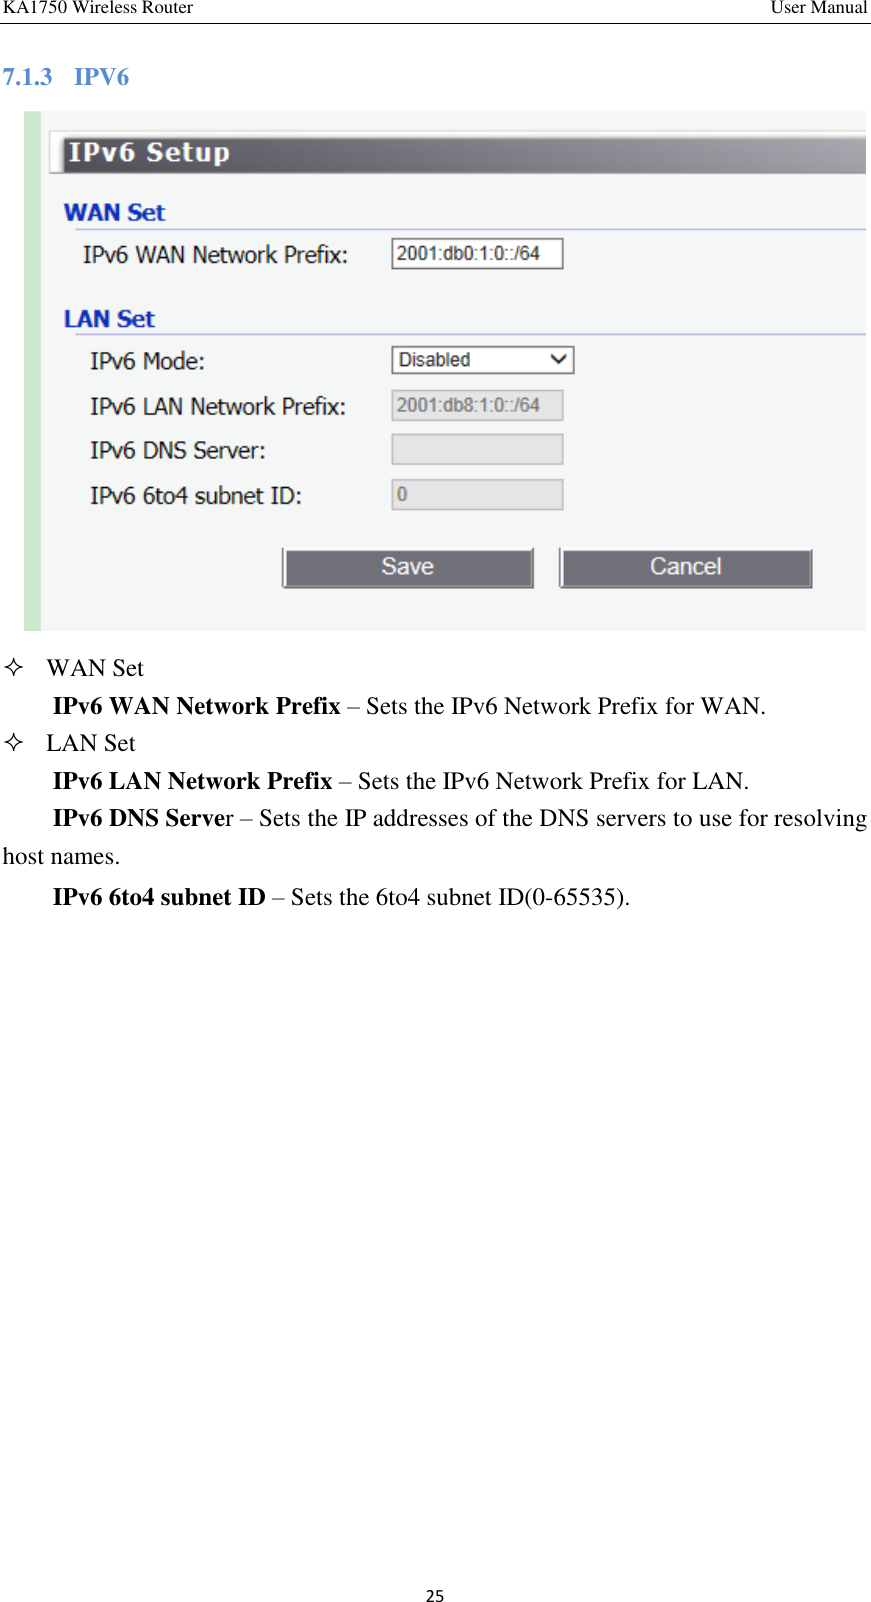 KA1750 Wireless Router       User Manual 25 7.1.3  IPV6      WAN Set IPv6 WAN Network Prefix – Sets the IPv6 Network Prefix for WAN.  LAN Set IPv6 LAN Network Prefix – Sets the IPv6 Network Prefix for LAN. IPv6 DNS Server – Sets the IP addresses of the DNS servers to use for resolving host names.   IPv6 6to4 subnet ID – Sets the 6to4 subnet ID(0-65535).   